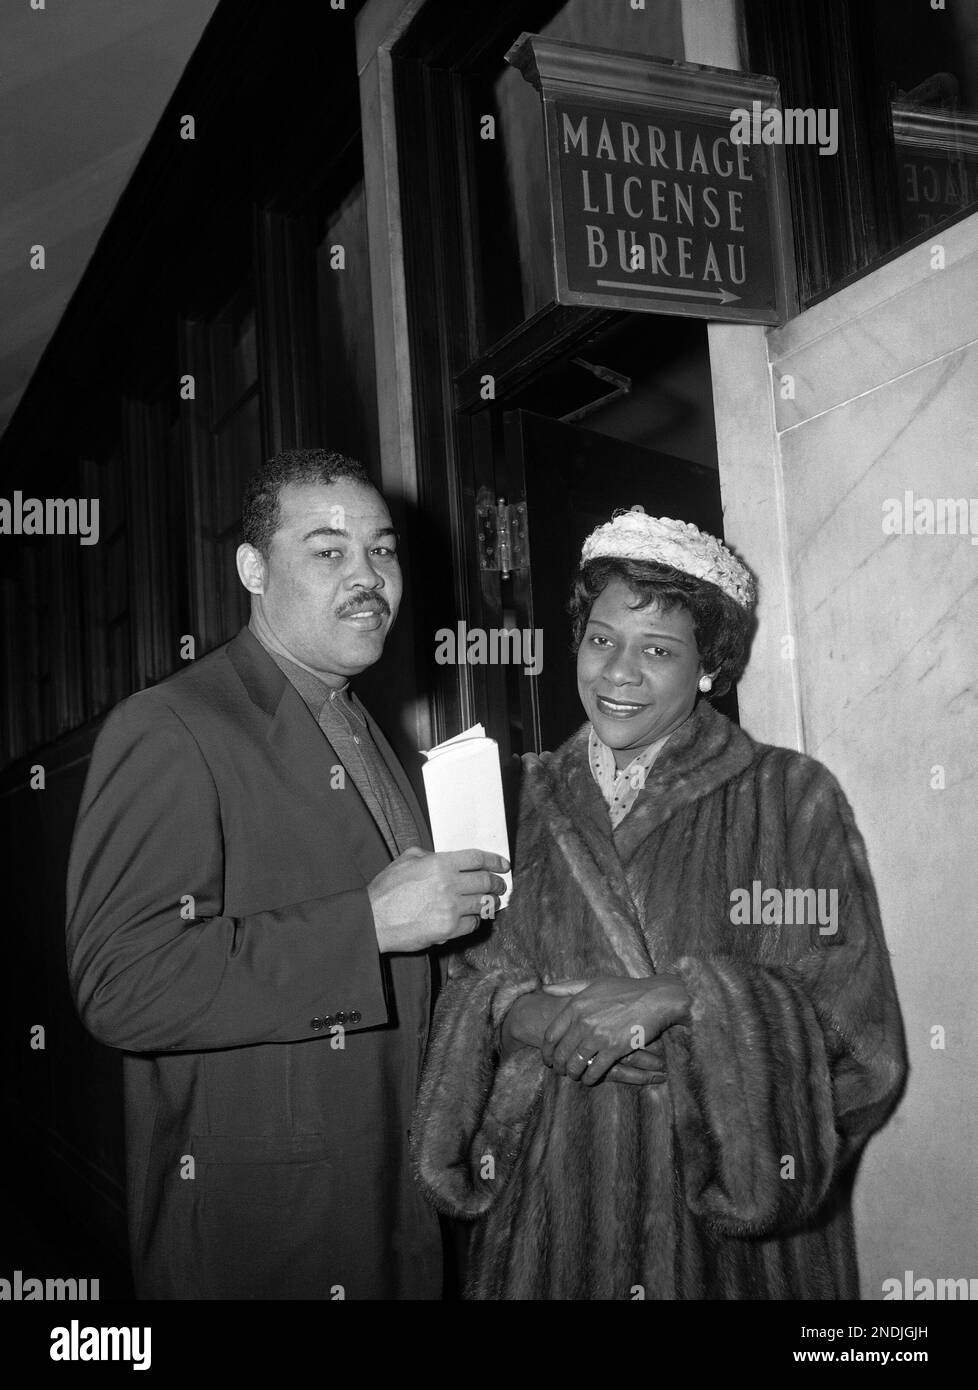 Former world heavyweight boxing champion Joe Louis, and Rose Morgan, a New  York city beauty shop owner, are shown at the door of the marriage license  bureau in the municipal building in